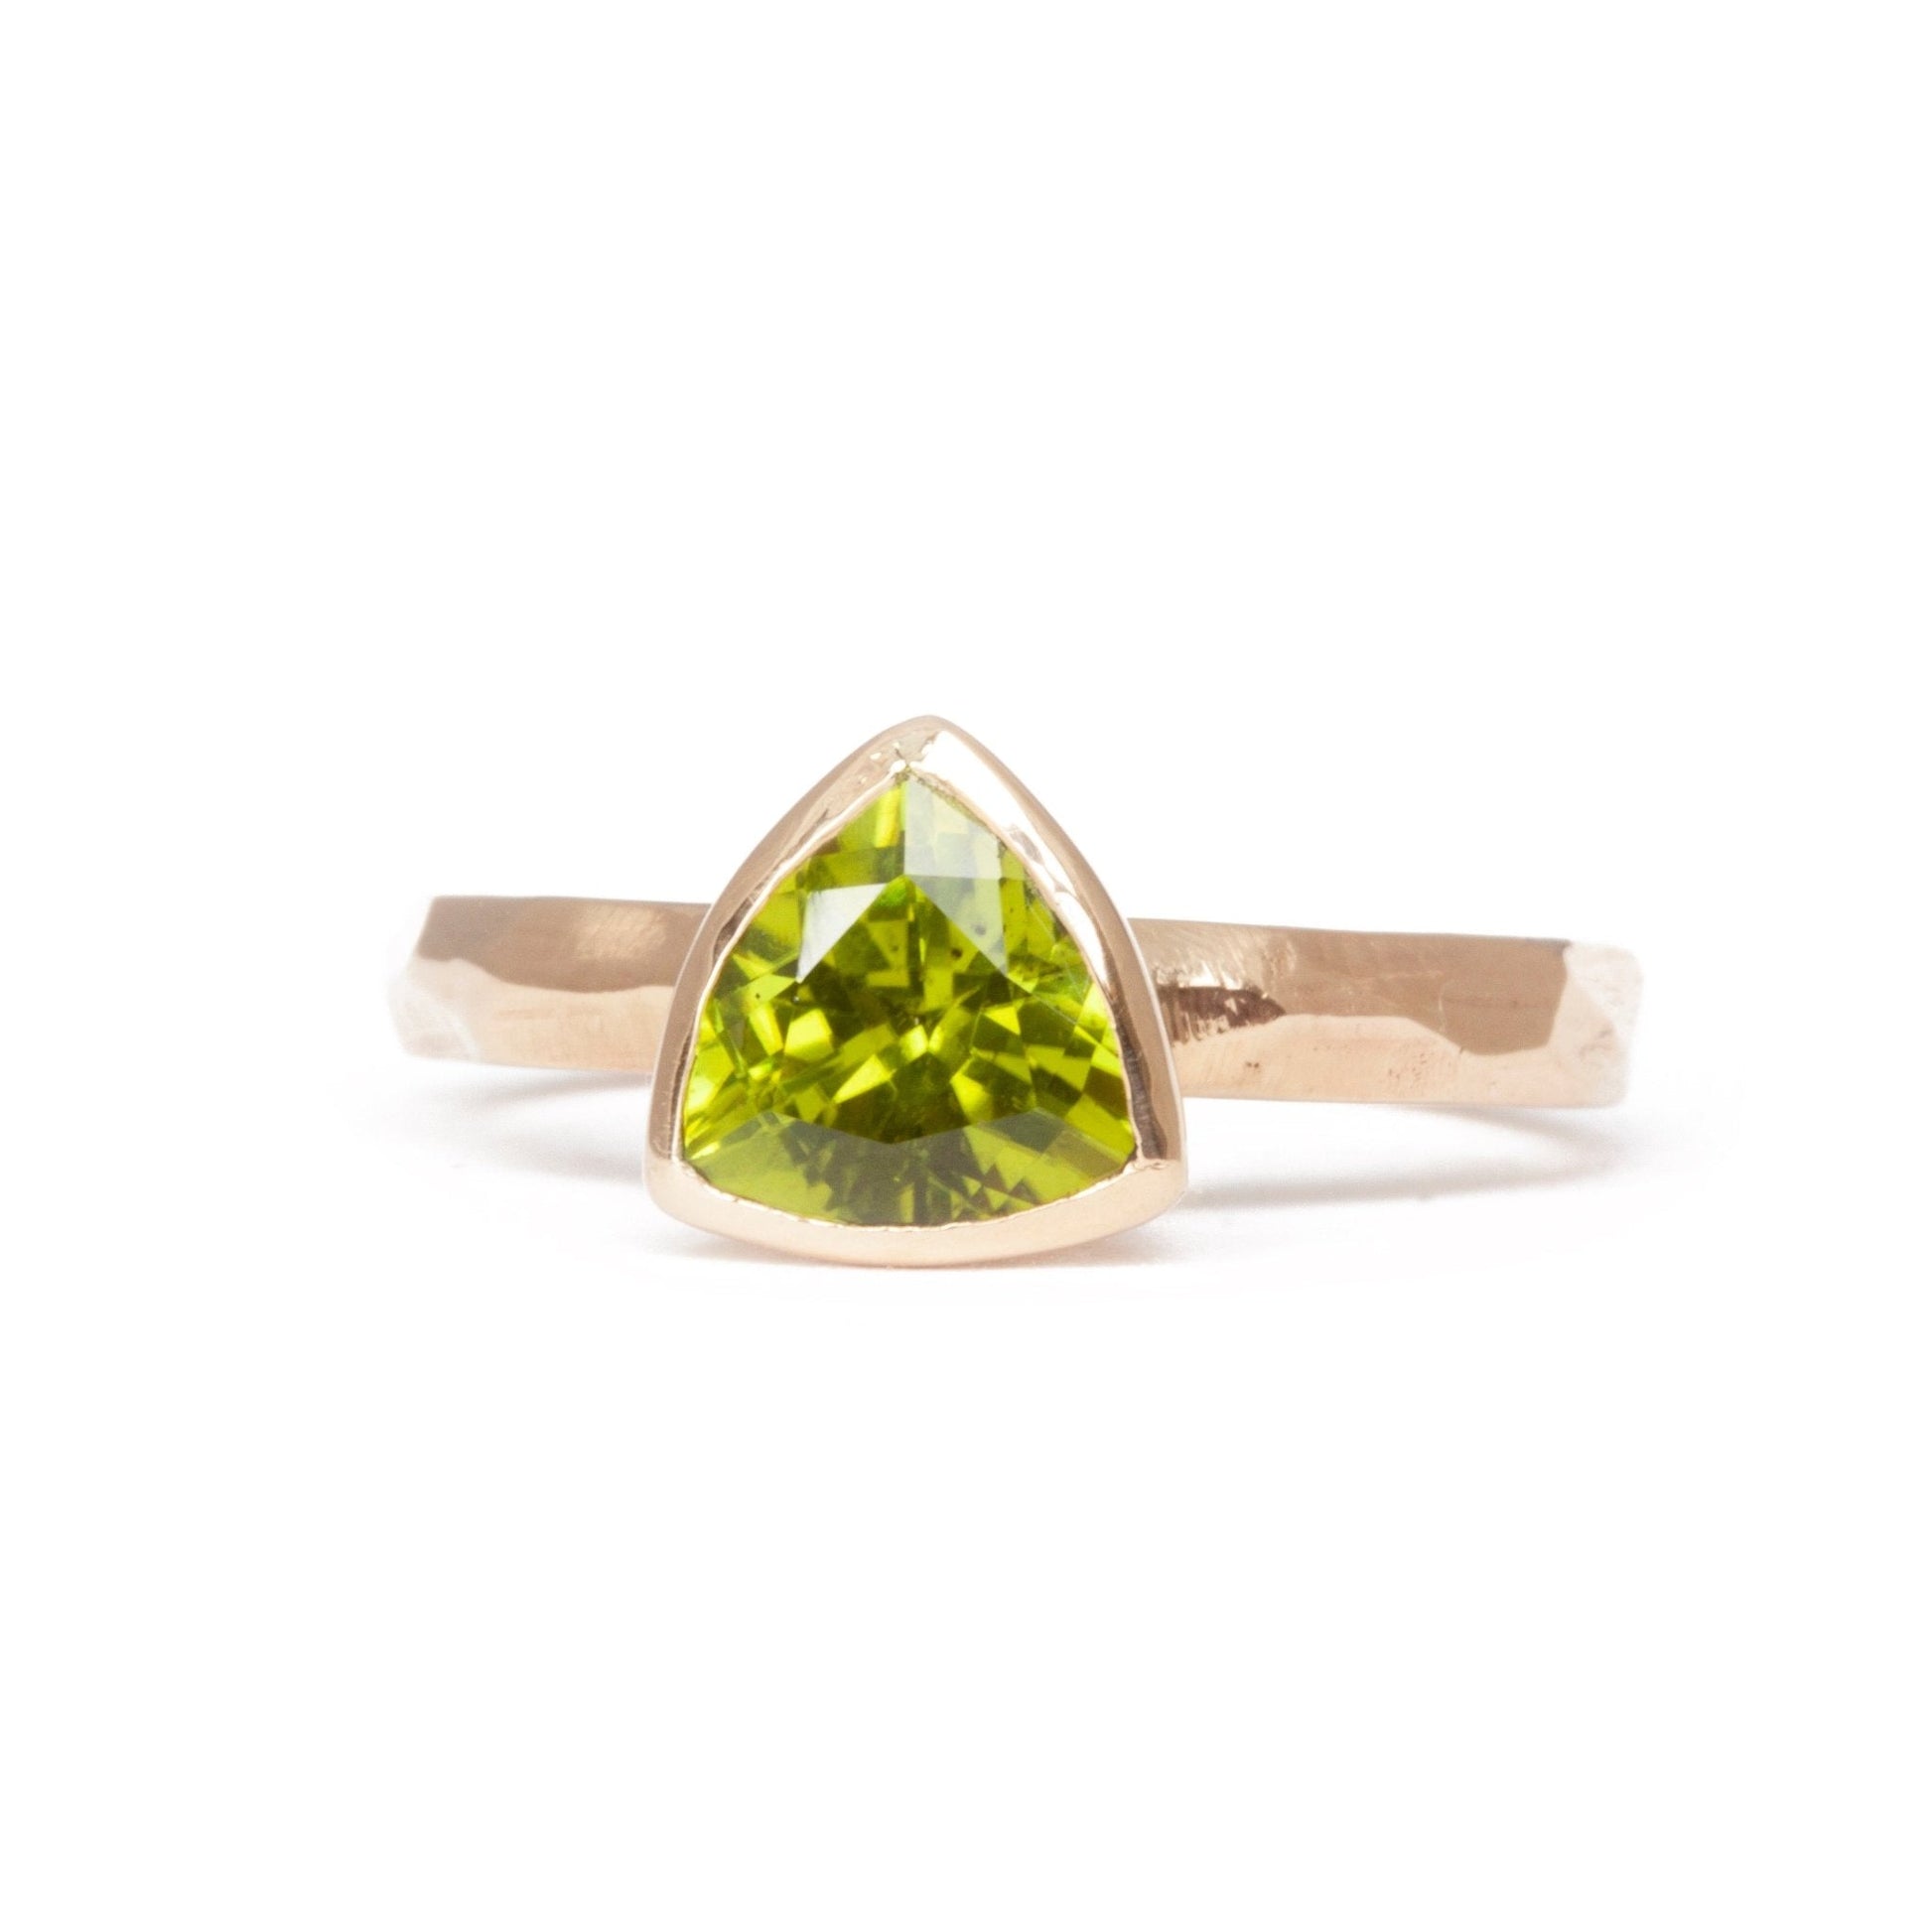 The Fairmined Arizona Peridot Trillion-Cut Carved Solitaire (Ready to ship in size 6) - W.R. Metalarts